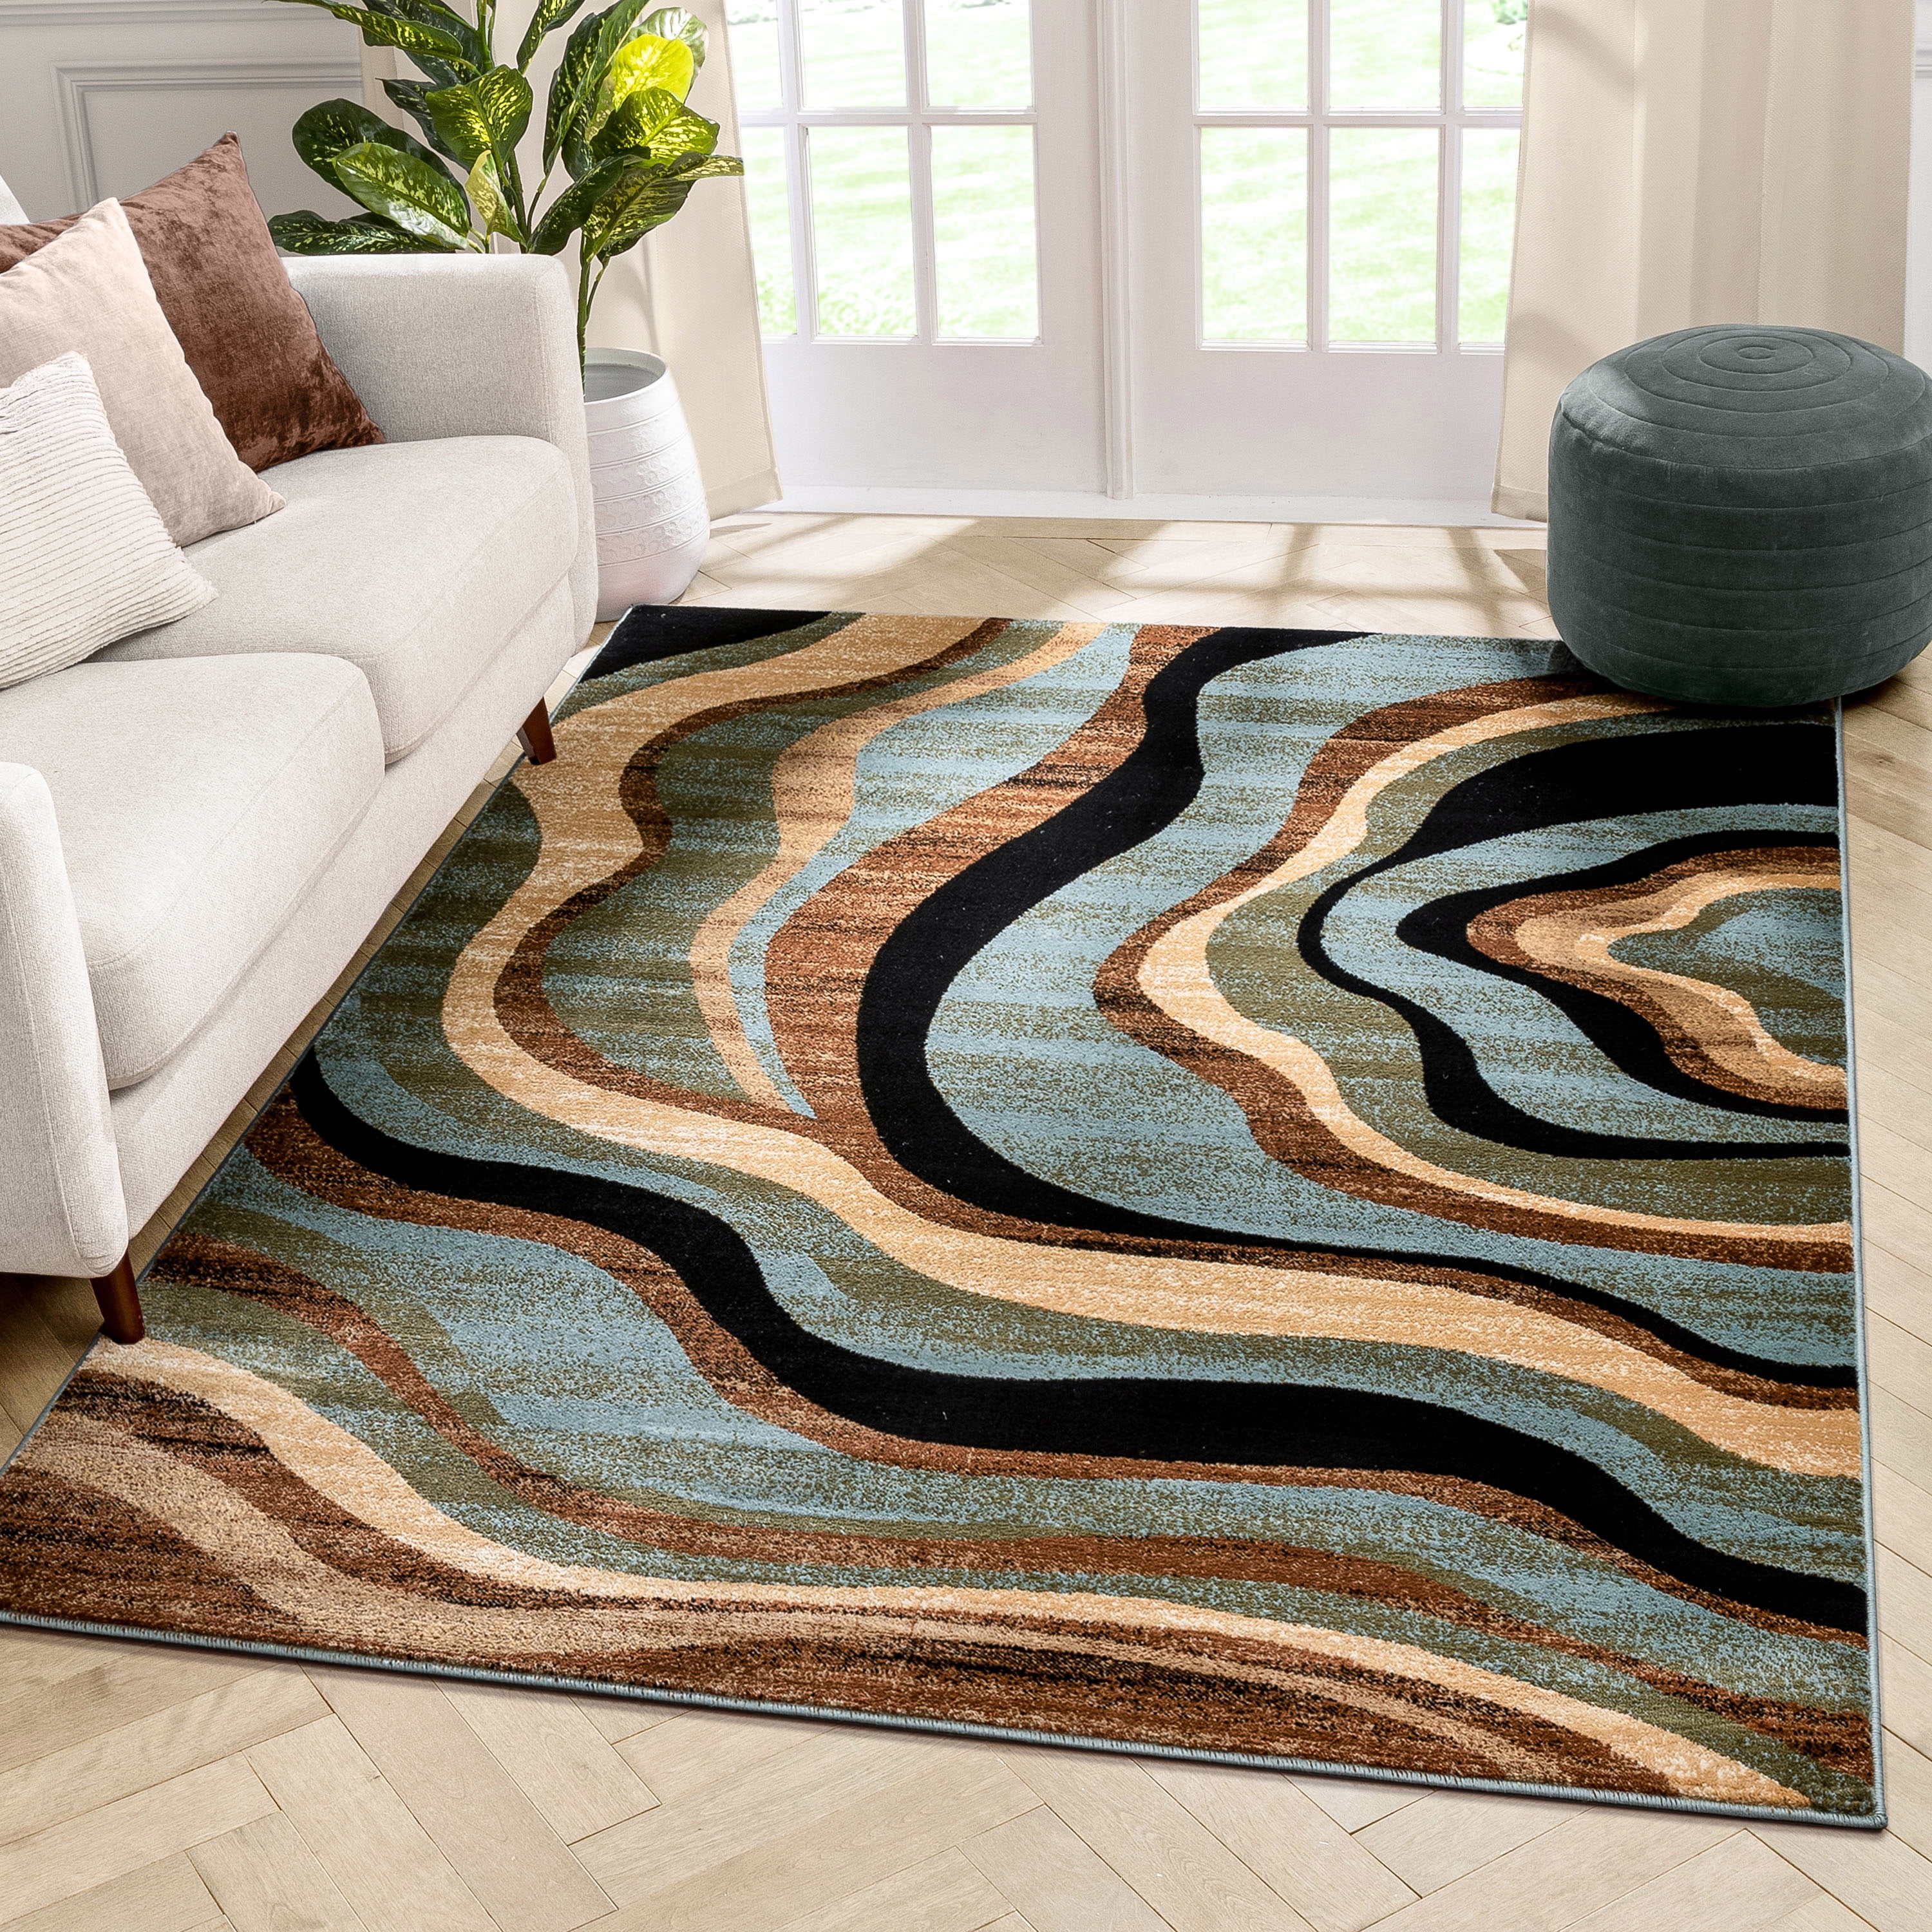 New Modern Rugs Swing Wave Pattern Small Extra Large Bedroom Living Room Rug 